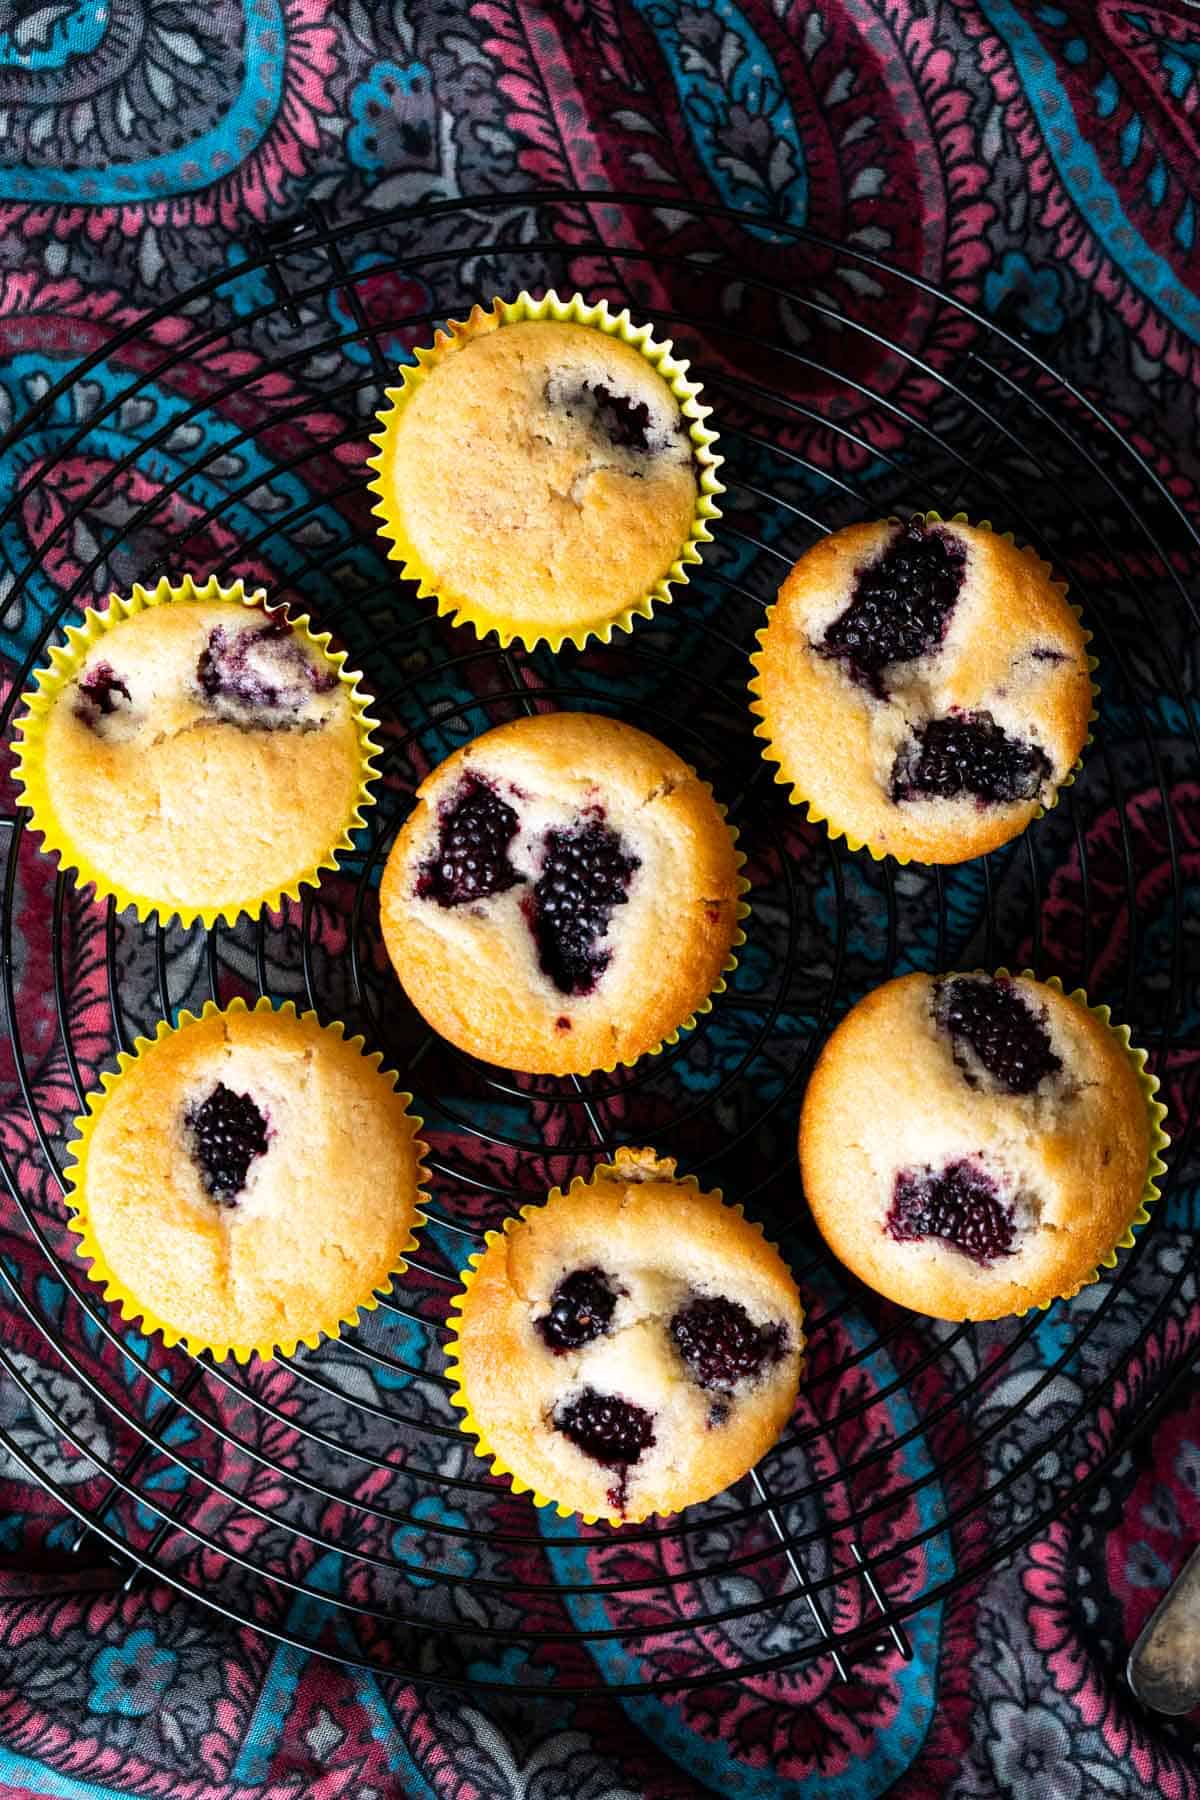 Vegan muffins placed on black wire rack on a colorful table cloth.